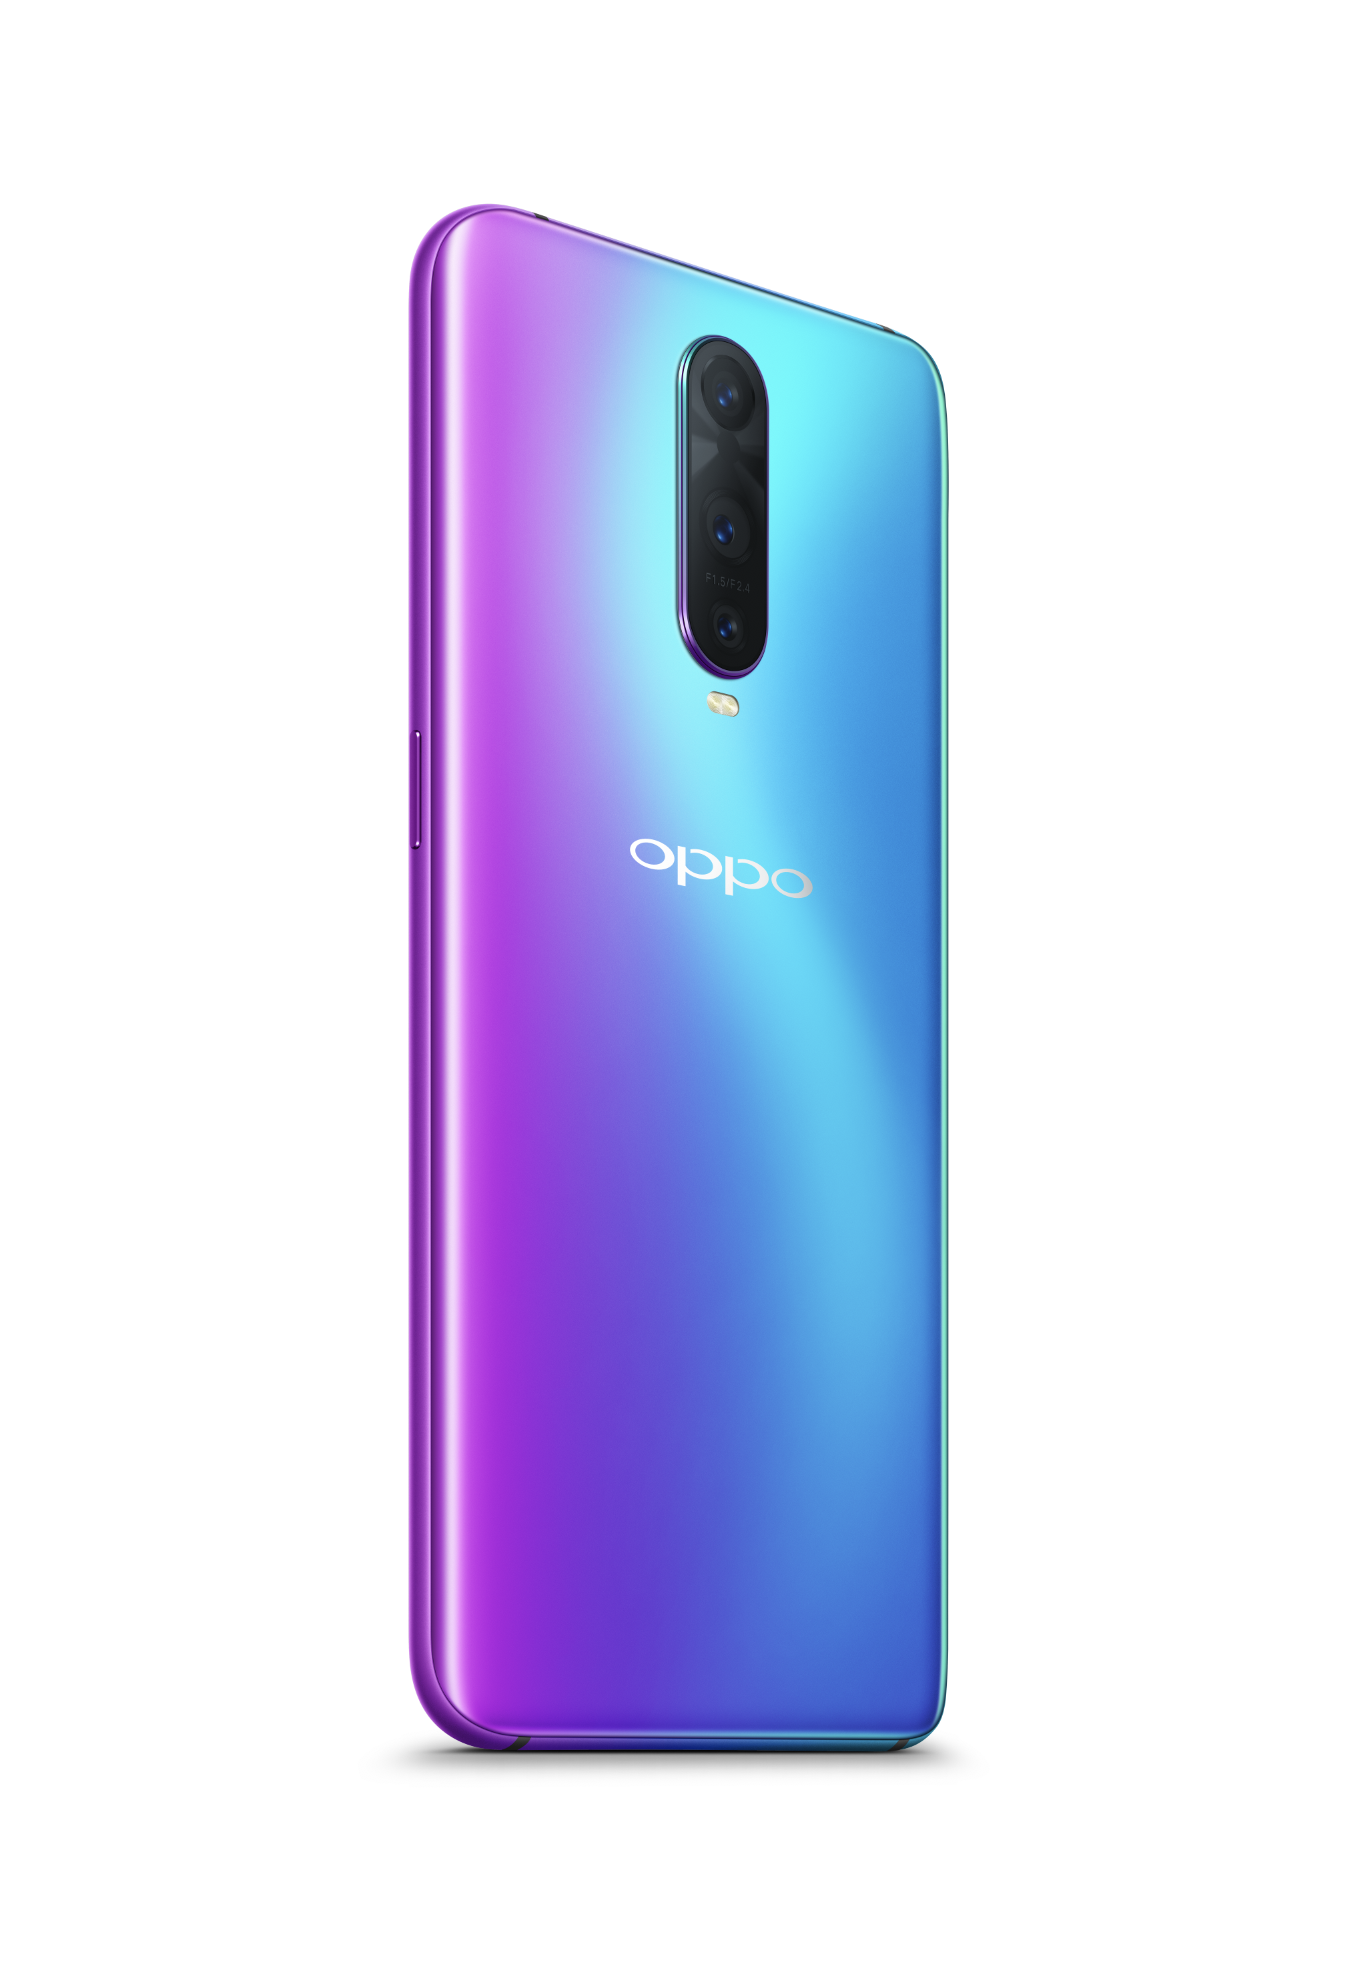 OPPO is Set to Launch Most Anticipated R Series with R17 Pro in Pakistan